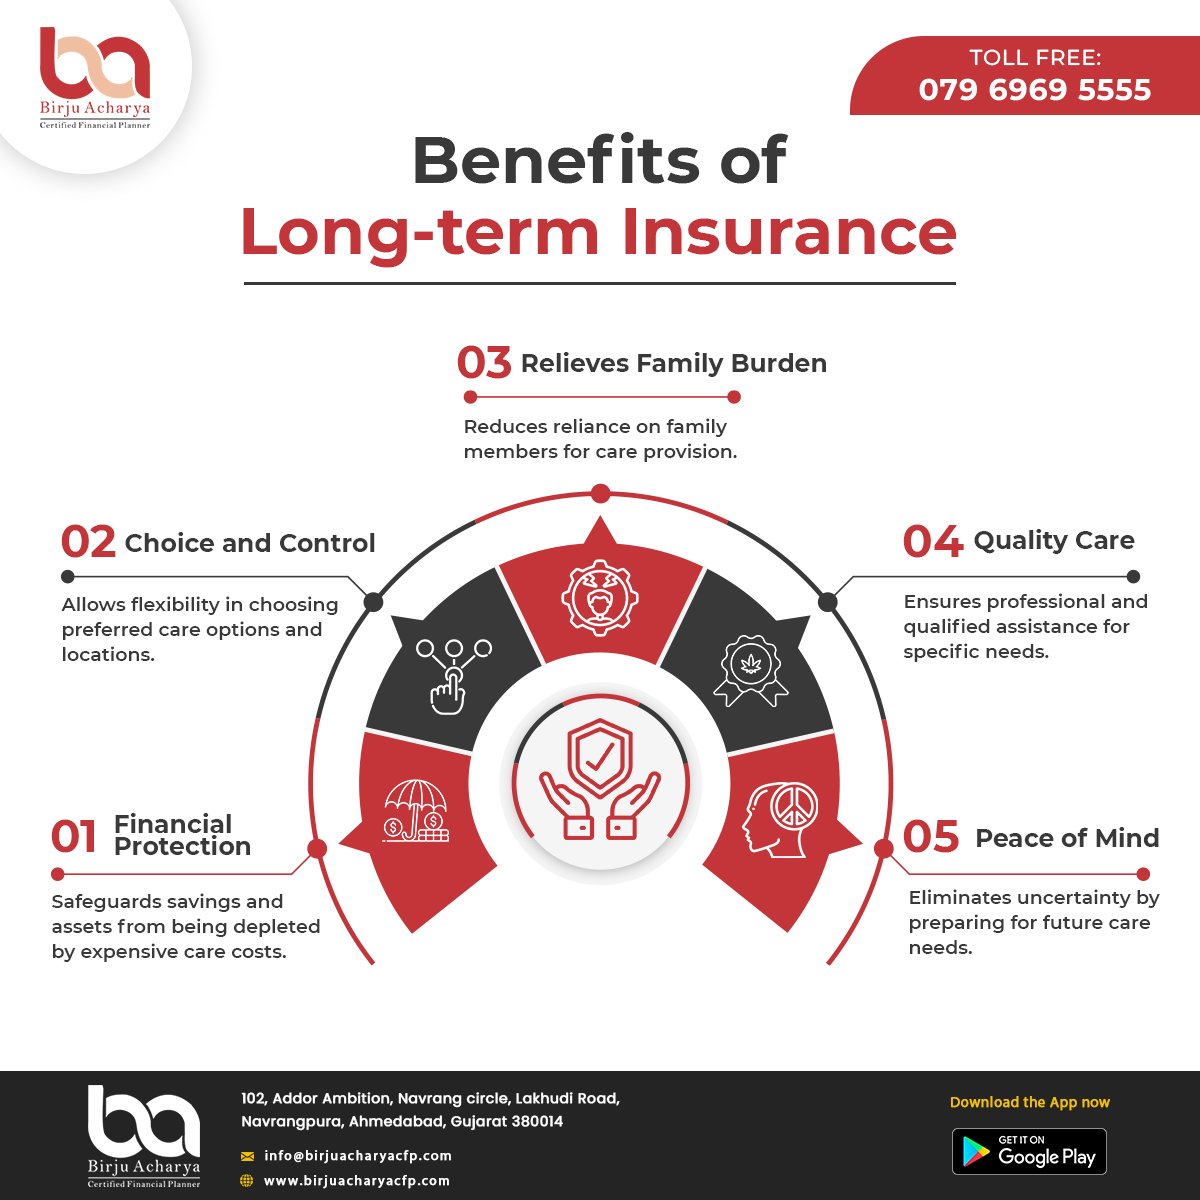 Secure your future with peace of mind! 🛡️💼 Invest in long-term insurance today and protect yourself against life's uncertainties.

#SecureYourLegacy #FinancialPeace #LongTermInsurance #birjuacharya #ahmedabad #healthinsurance #advice #insurance #finacialplanner #finacialplanning